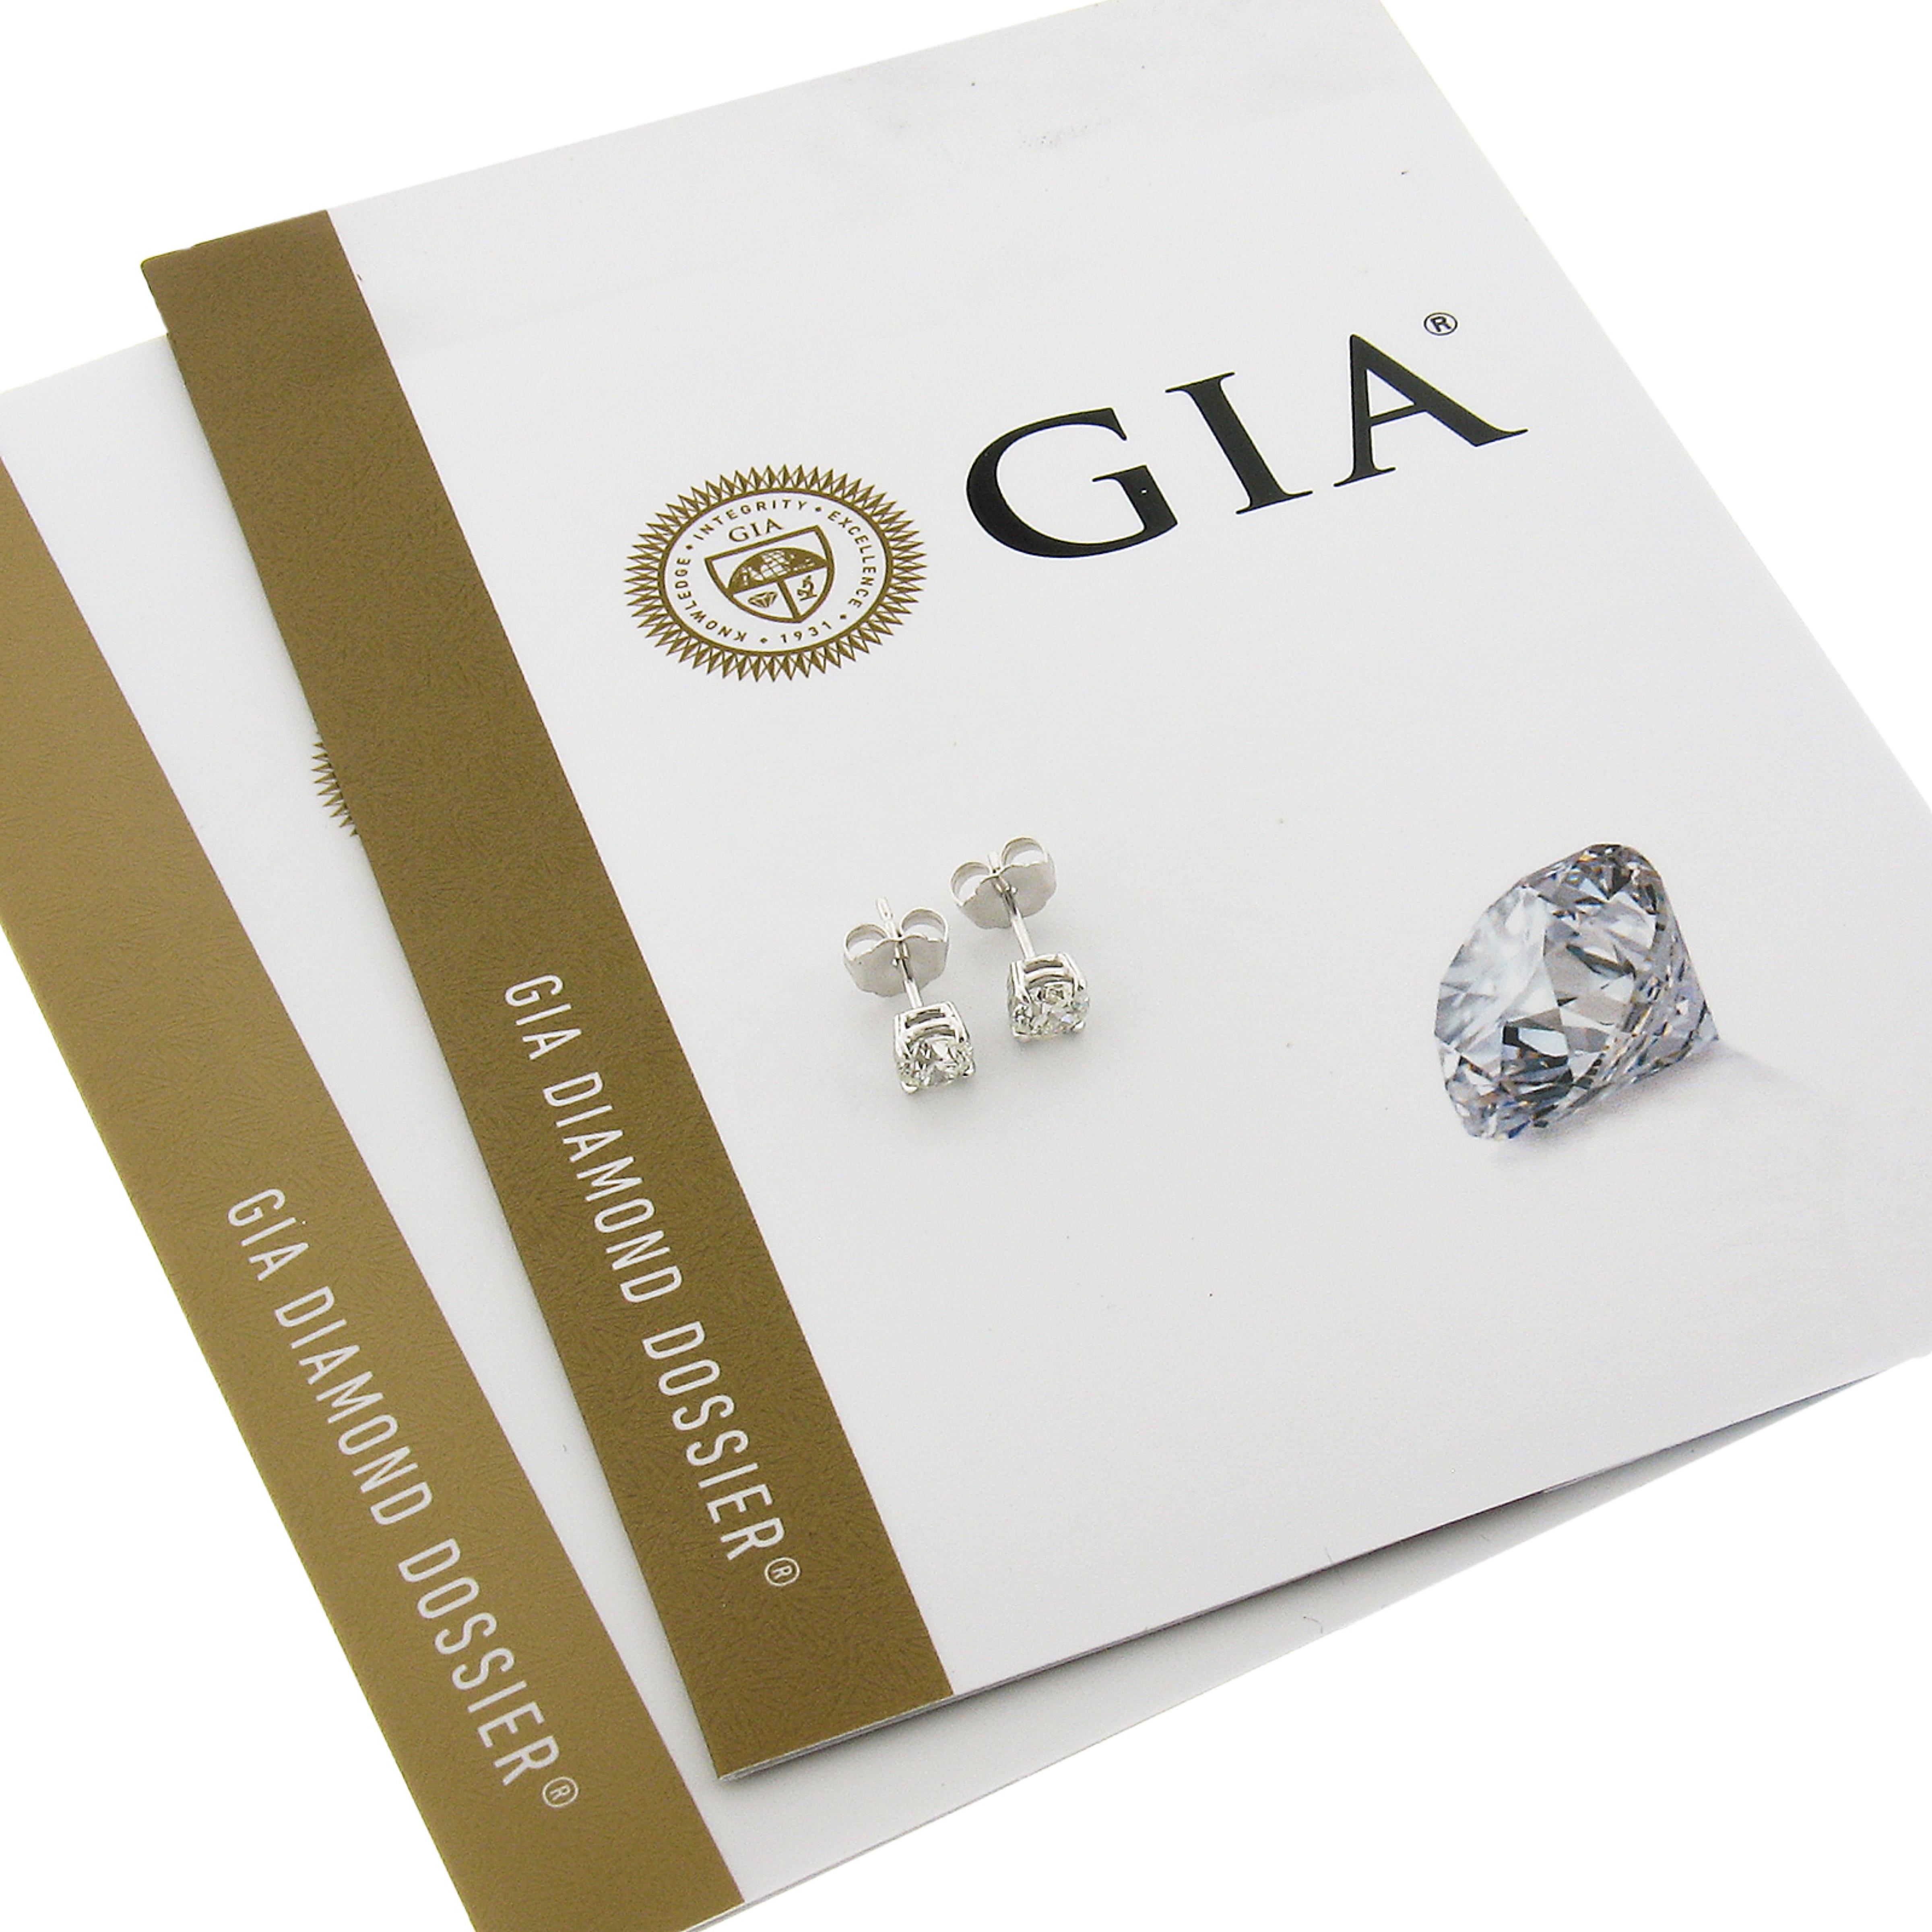 This elegant pair of diamond stud earrings was newly crafted from solid 14k white gold and features two brilliant and fiery, GIA certified round diamonds. These very fine quality diamonds total exactly 0.80 carats in weight and they come with the